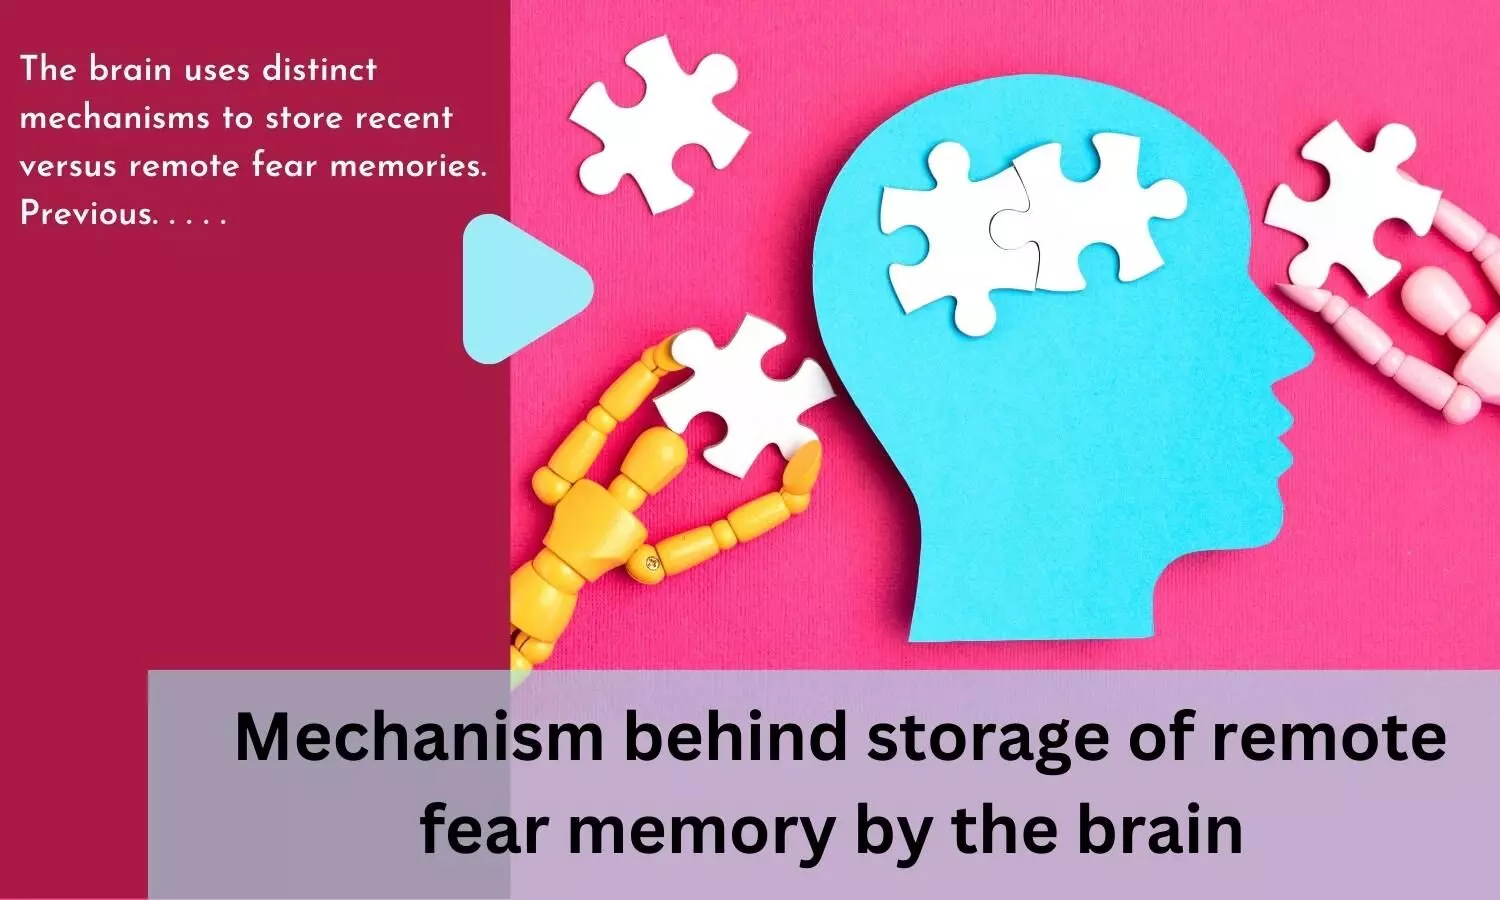 Mechanism behind storage of remote fear memory by the brain